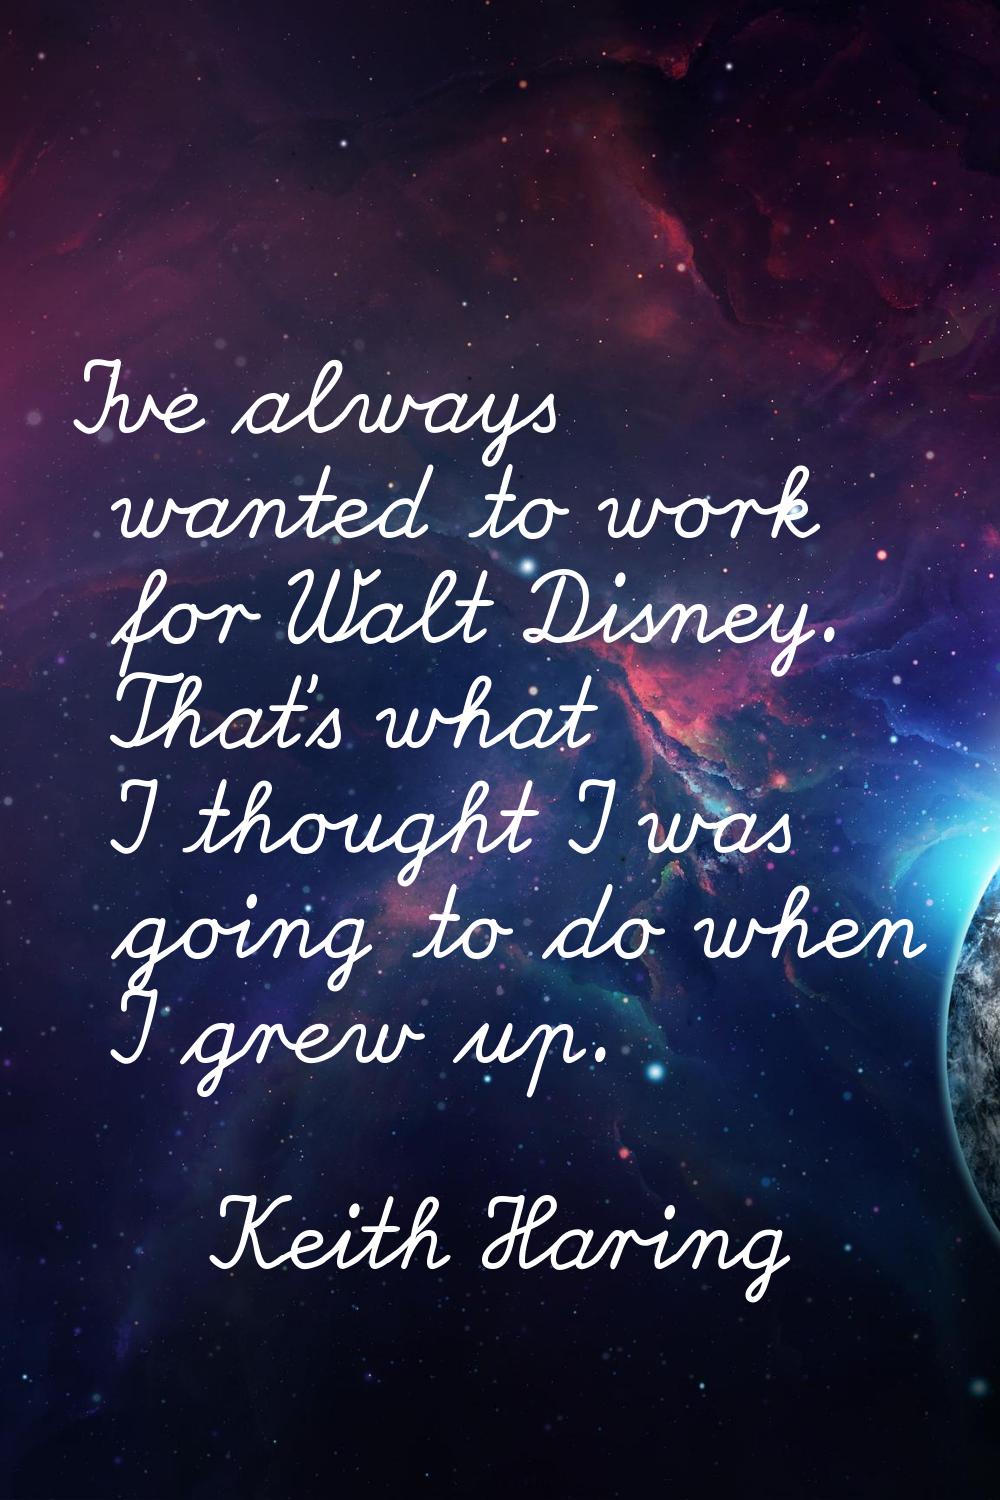 I've always wanted to work for Walt Disney. That's what I thought I was going to do when I grew up.